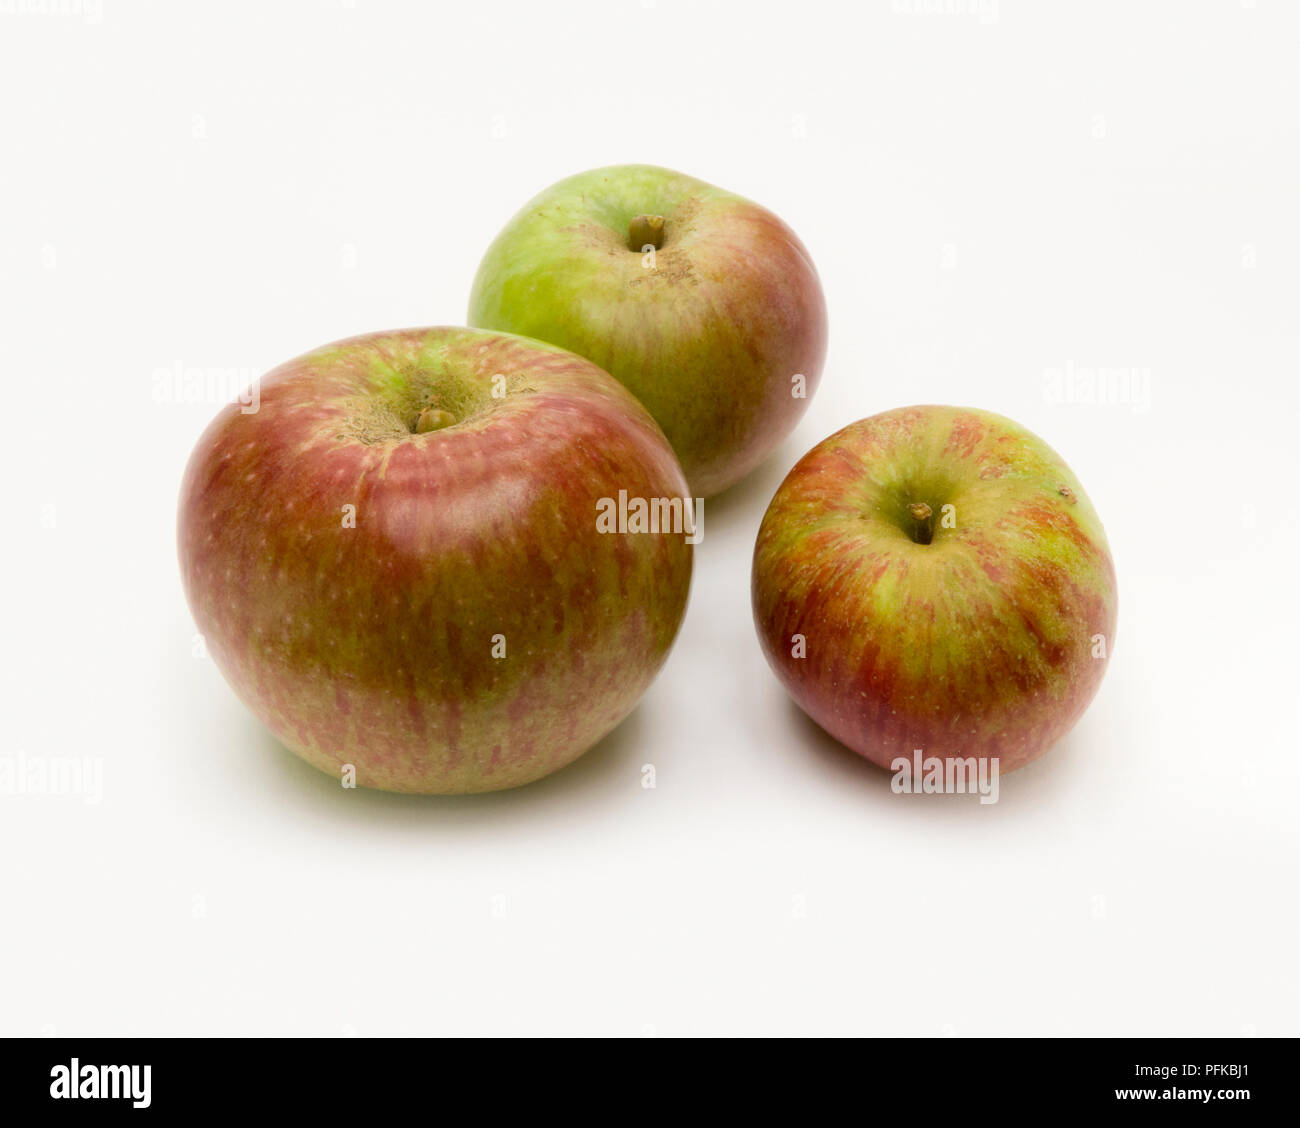 Apples 'Howgate Wonder', three cooking apples, grown in Great Britain, close-up Stock Photo